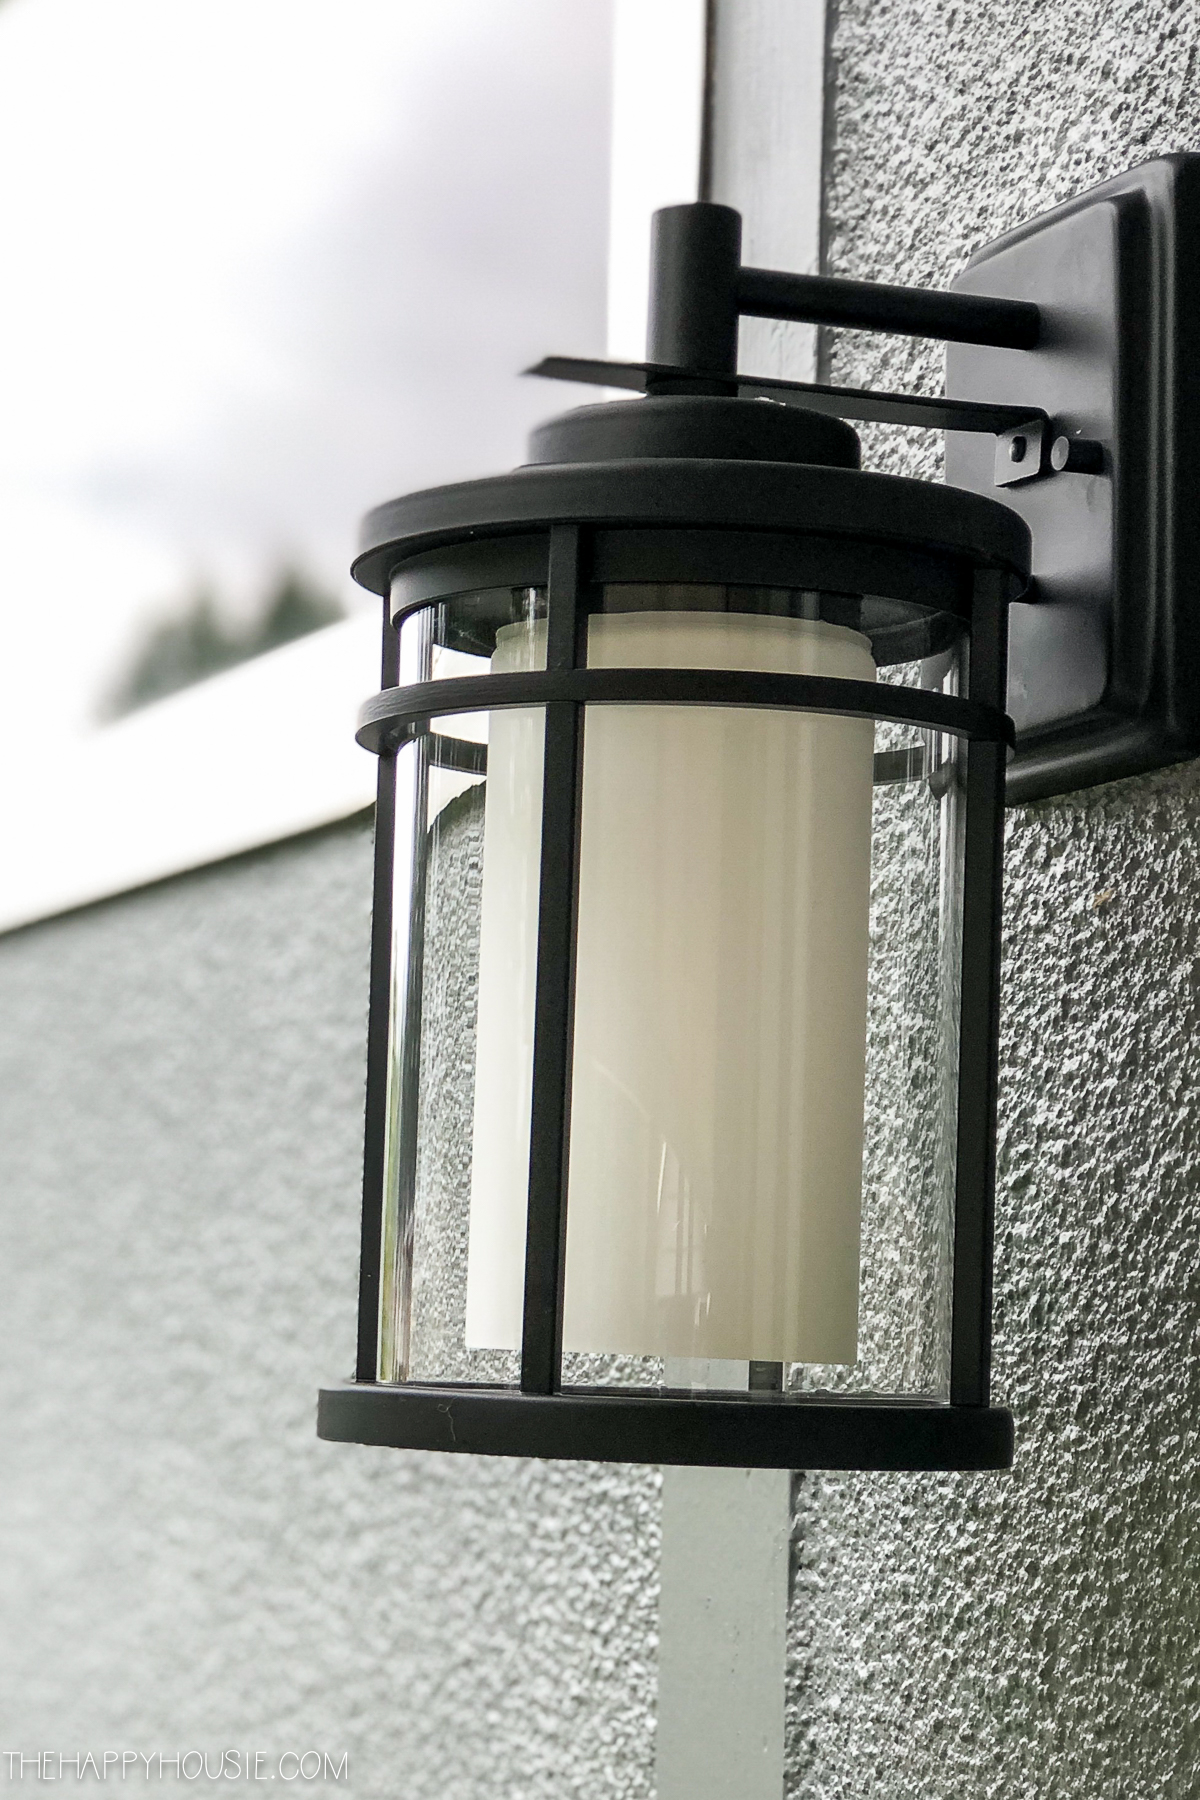 A black and white light hanging on the outside of the house.